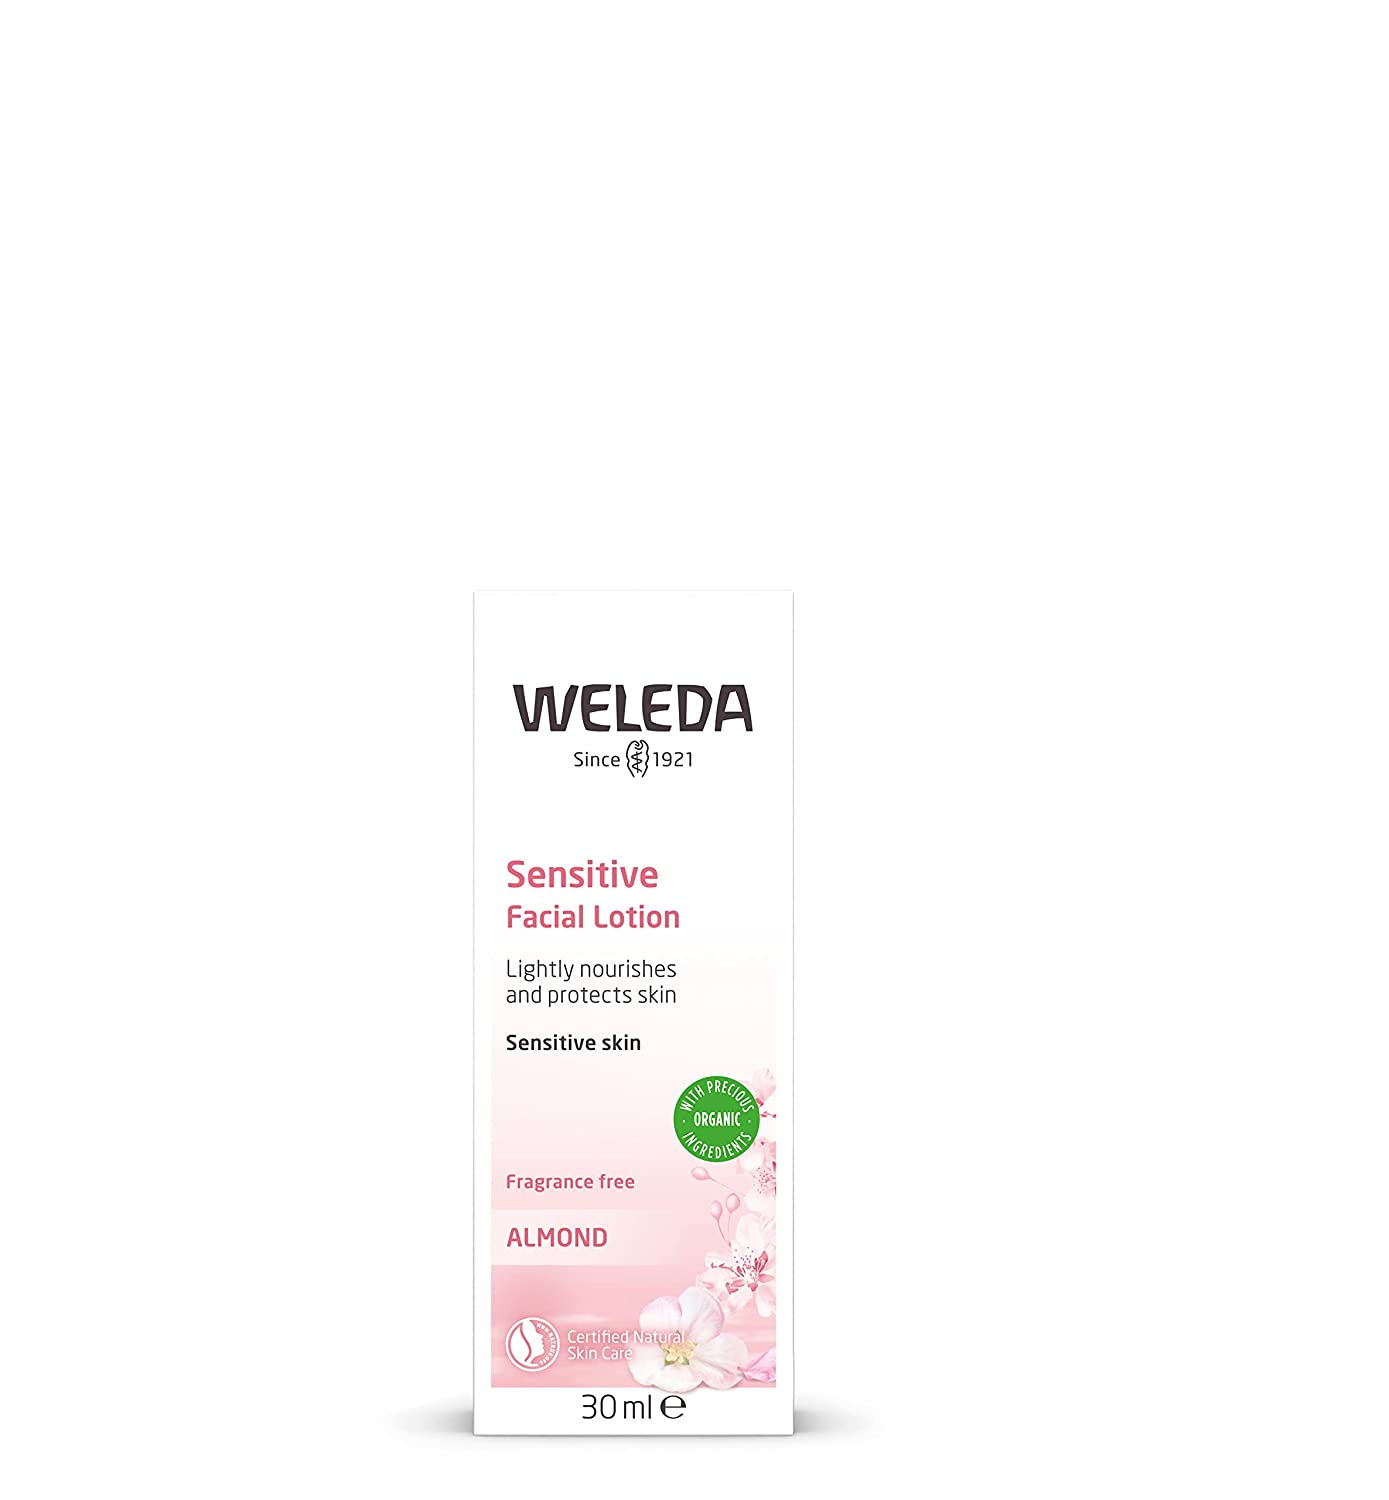 Weleda Almond Soothing Moisturiser, Natural Cosmetic, Gentle and Unperfumed Face Cream for Sensitive Combination Skin on the Face and Neck for a Healthy Complexion (1 x 30 ml)